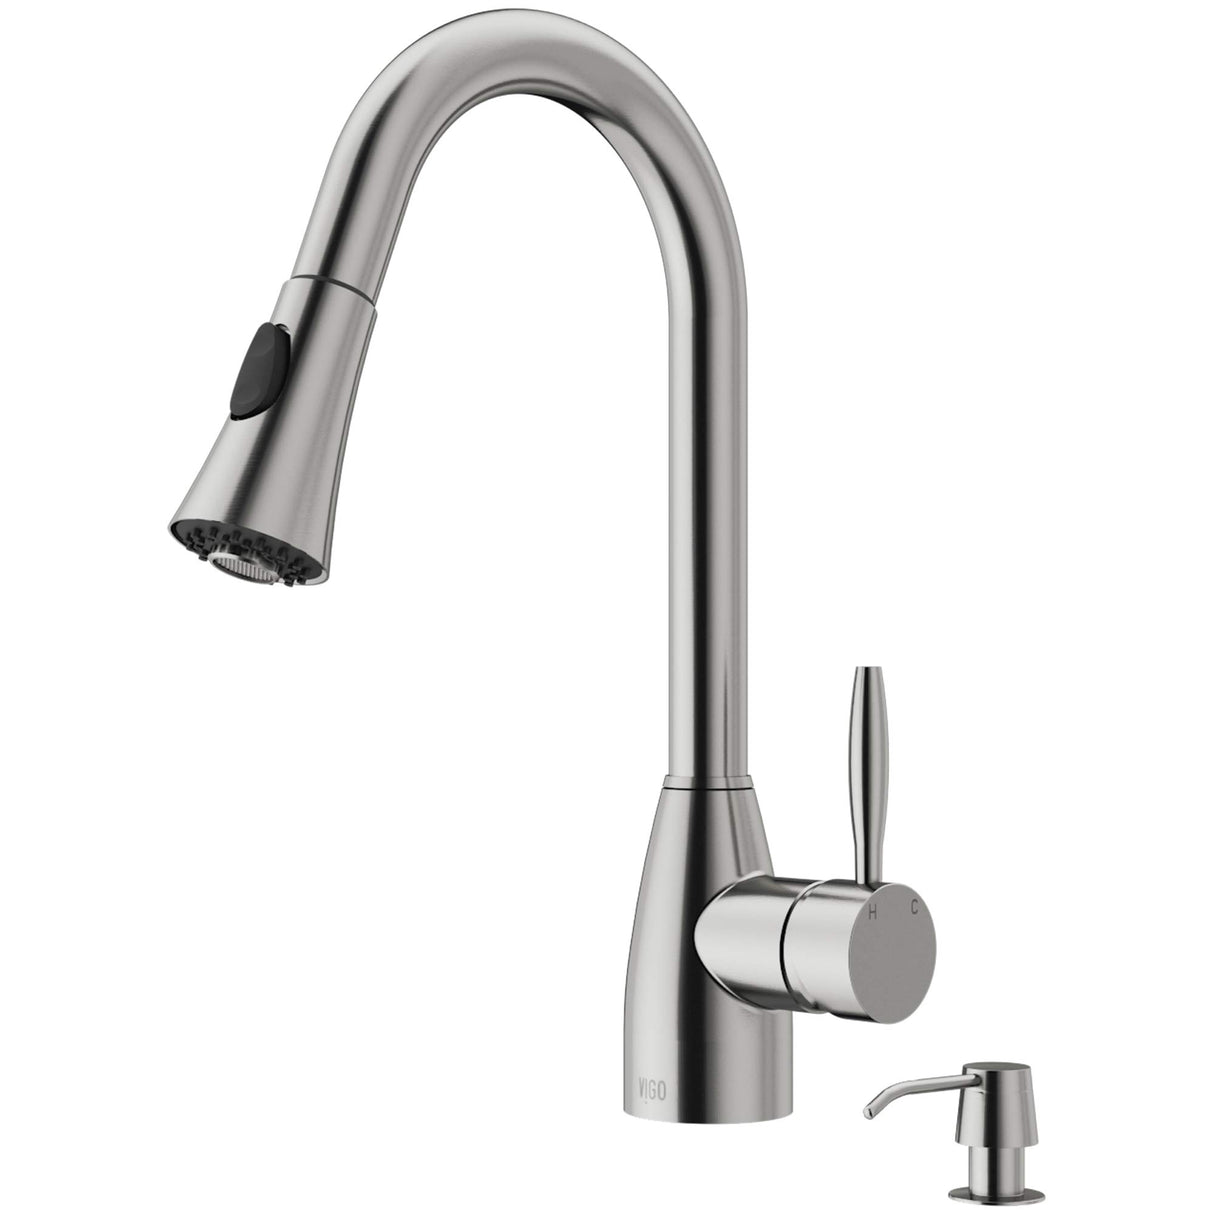 VIGO VG02013STK2 16" H Aylesbury Single-Handle with Pull-Down Sprayer Kitchen Faucet with Soap Dispenser in Stainless Steel